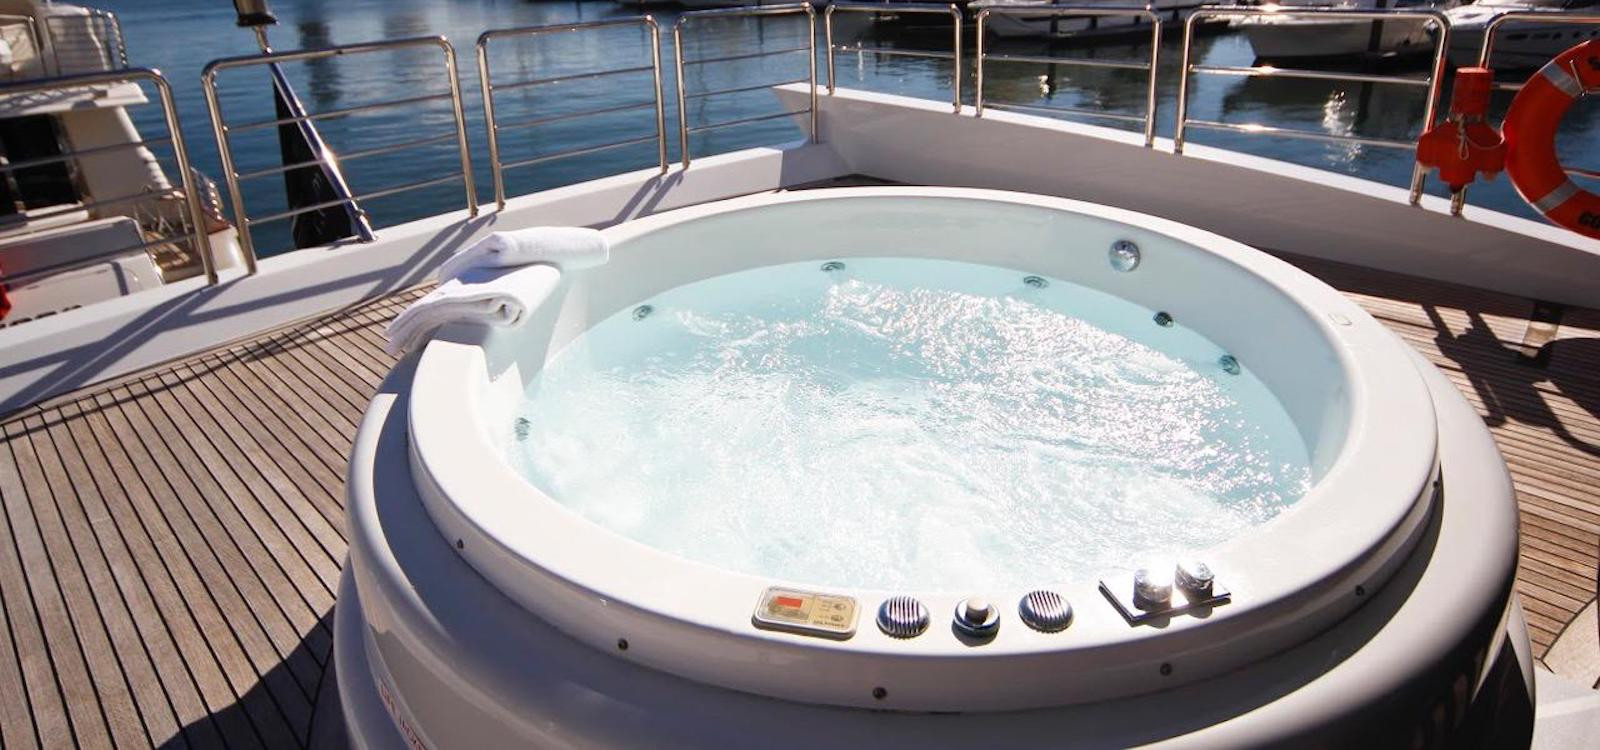 Jacuzzi on sunny day on superyacht hire on Seven Star